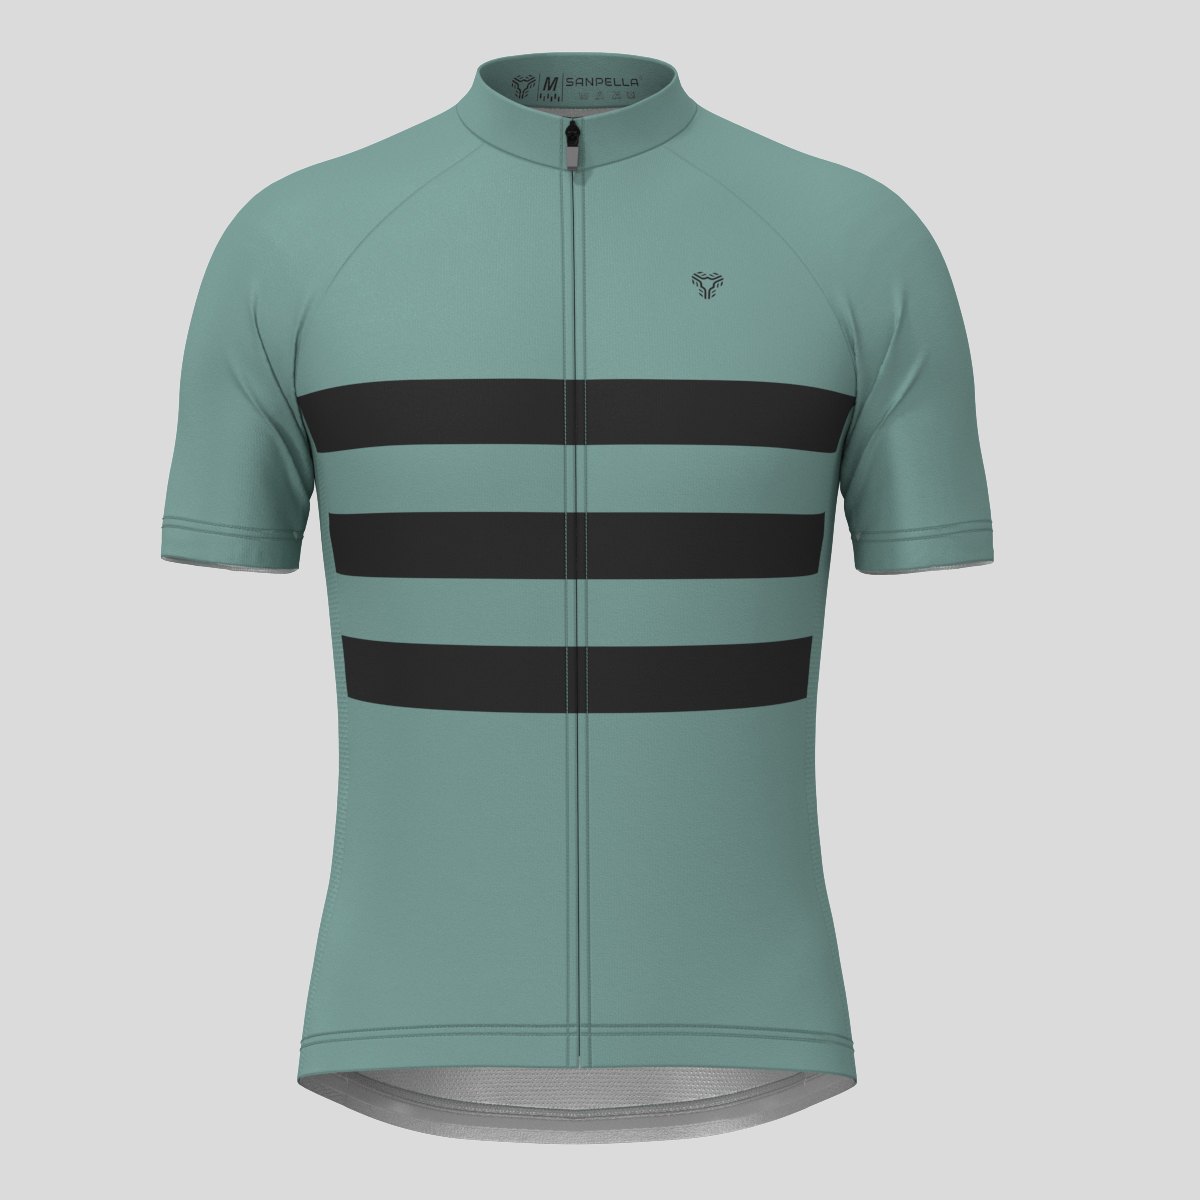 Sanpella Classic colored lines Men's Cycling Jersey